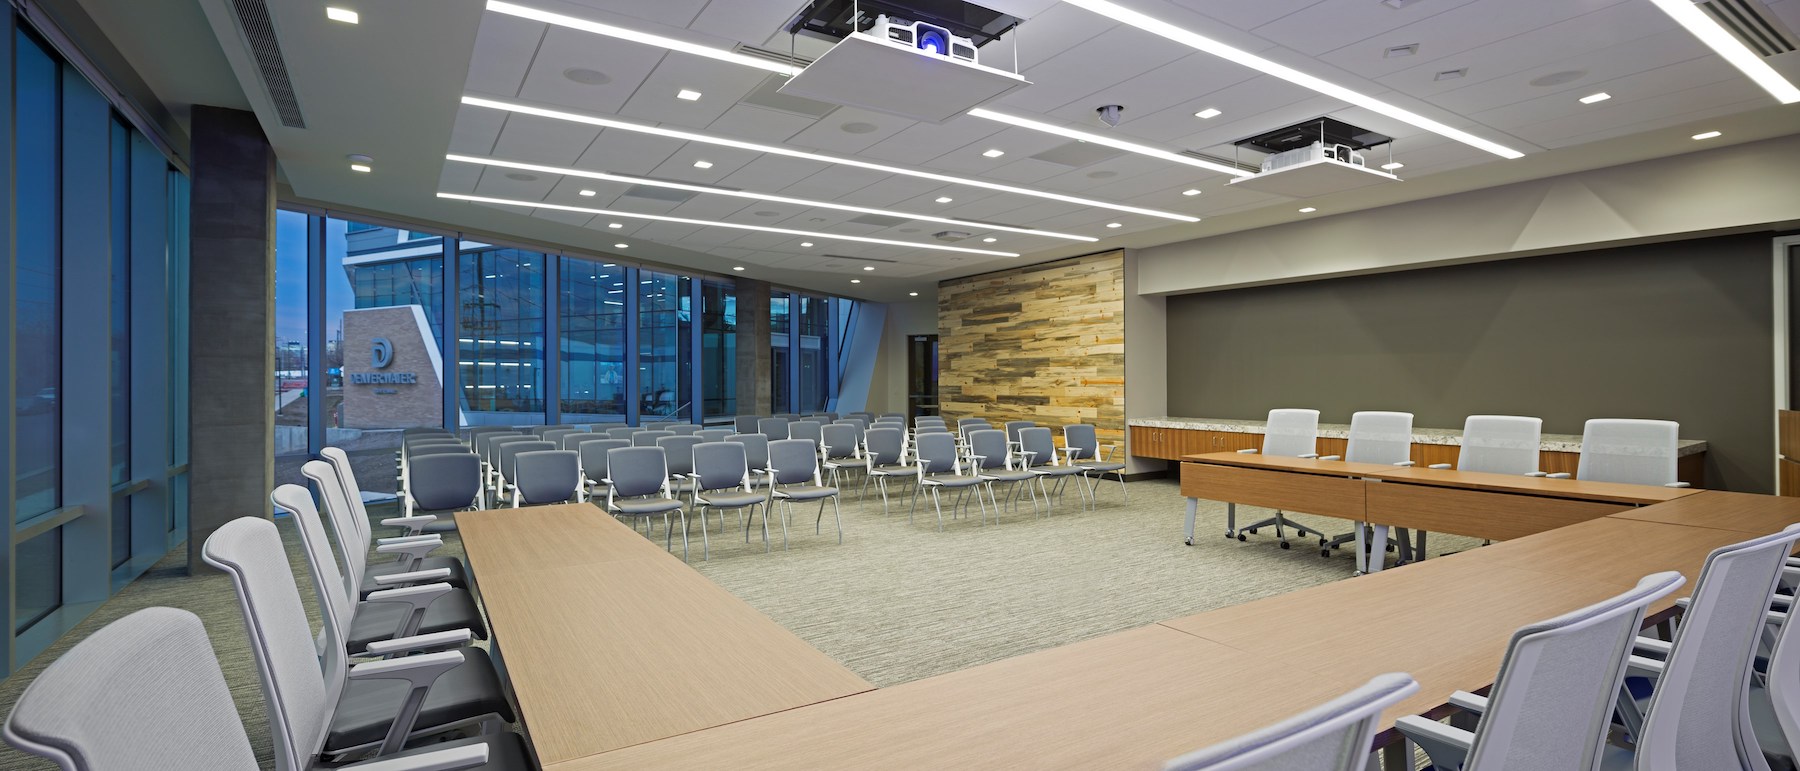 A conference room in the new admin building.